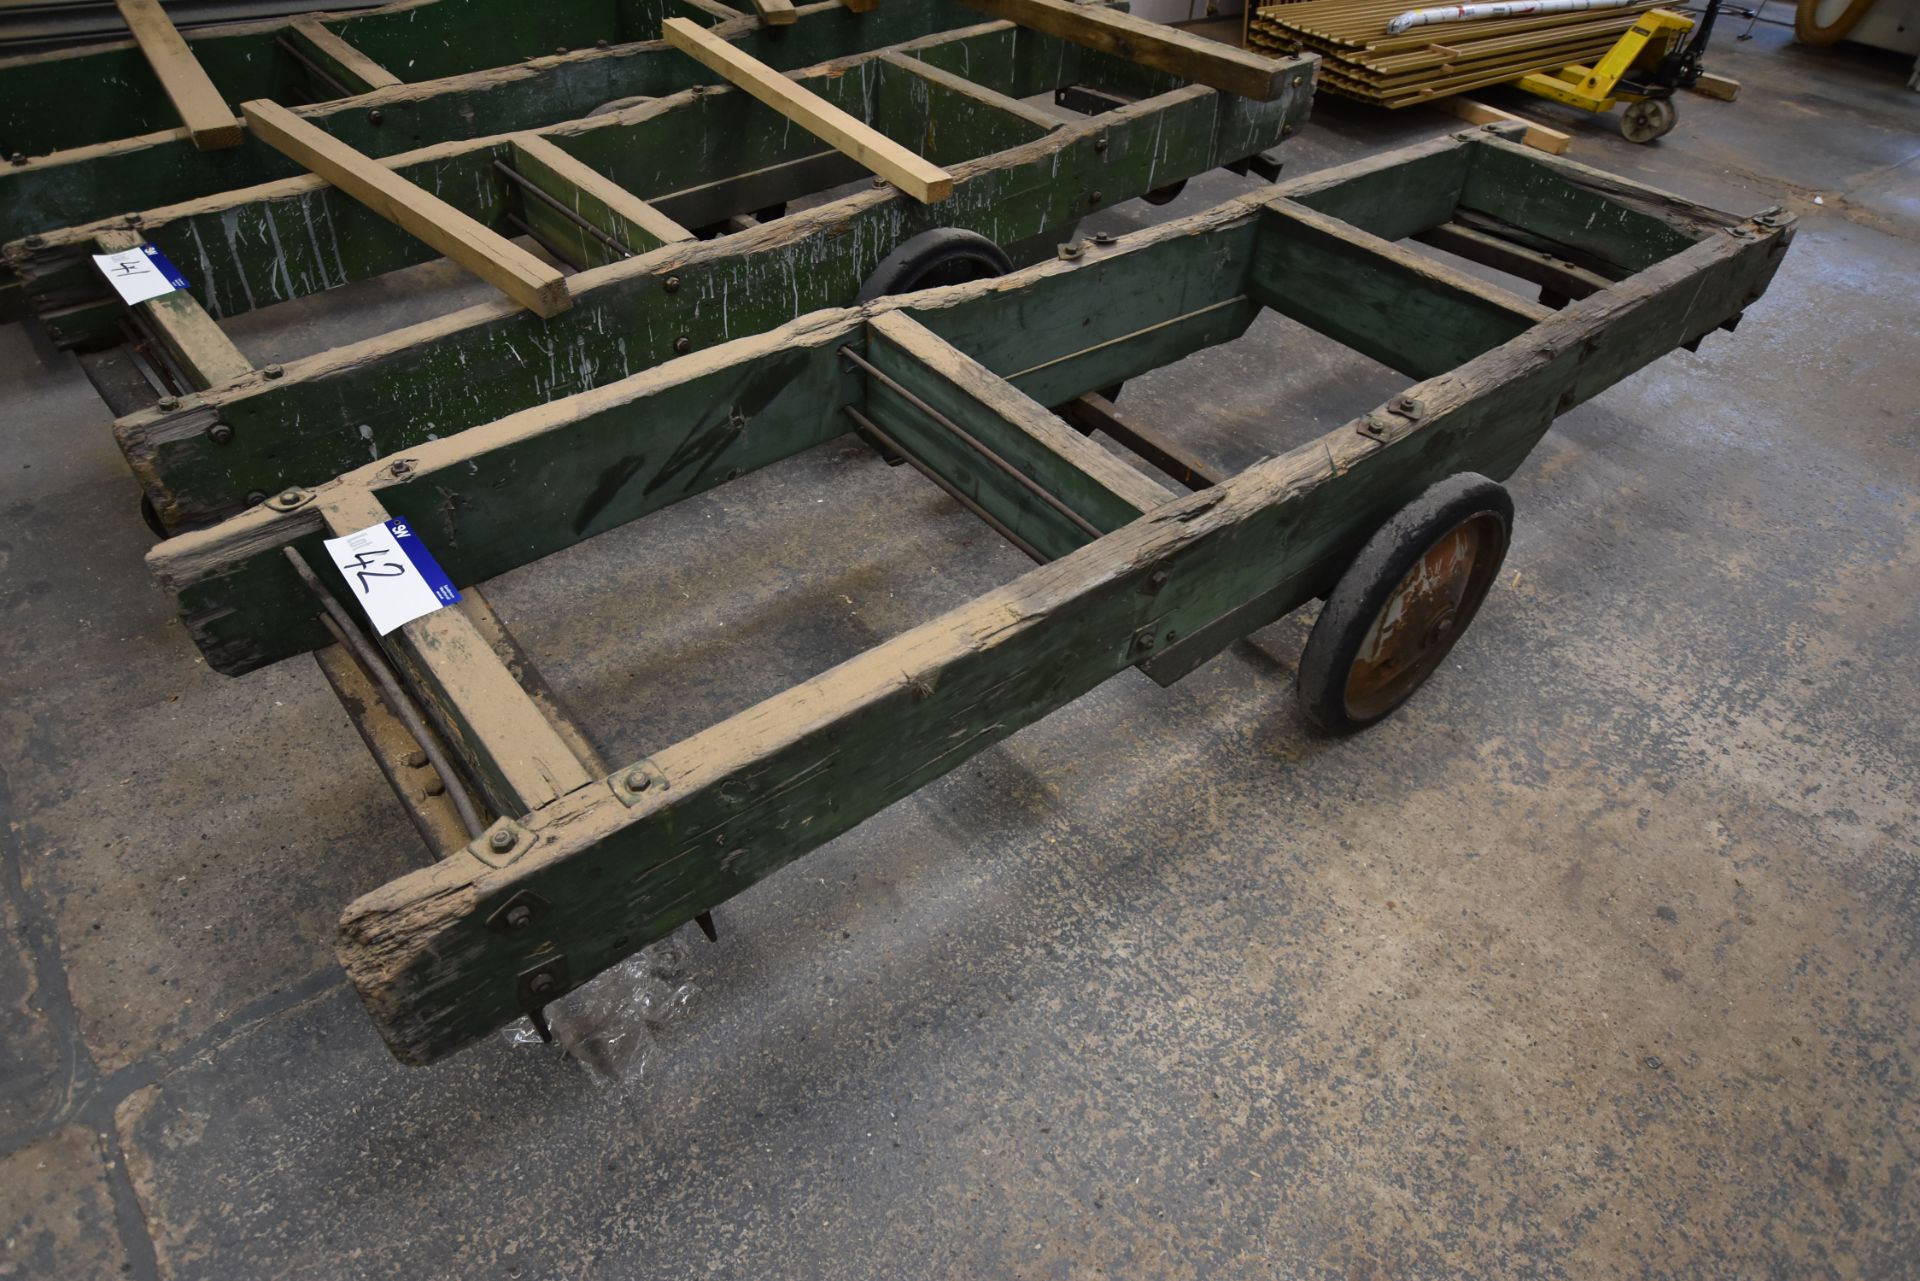 Timber Framed Trolley, approx. 800mm x 3.3m